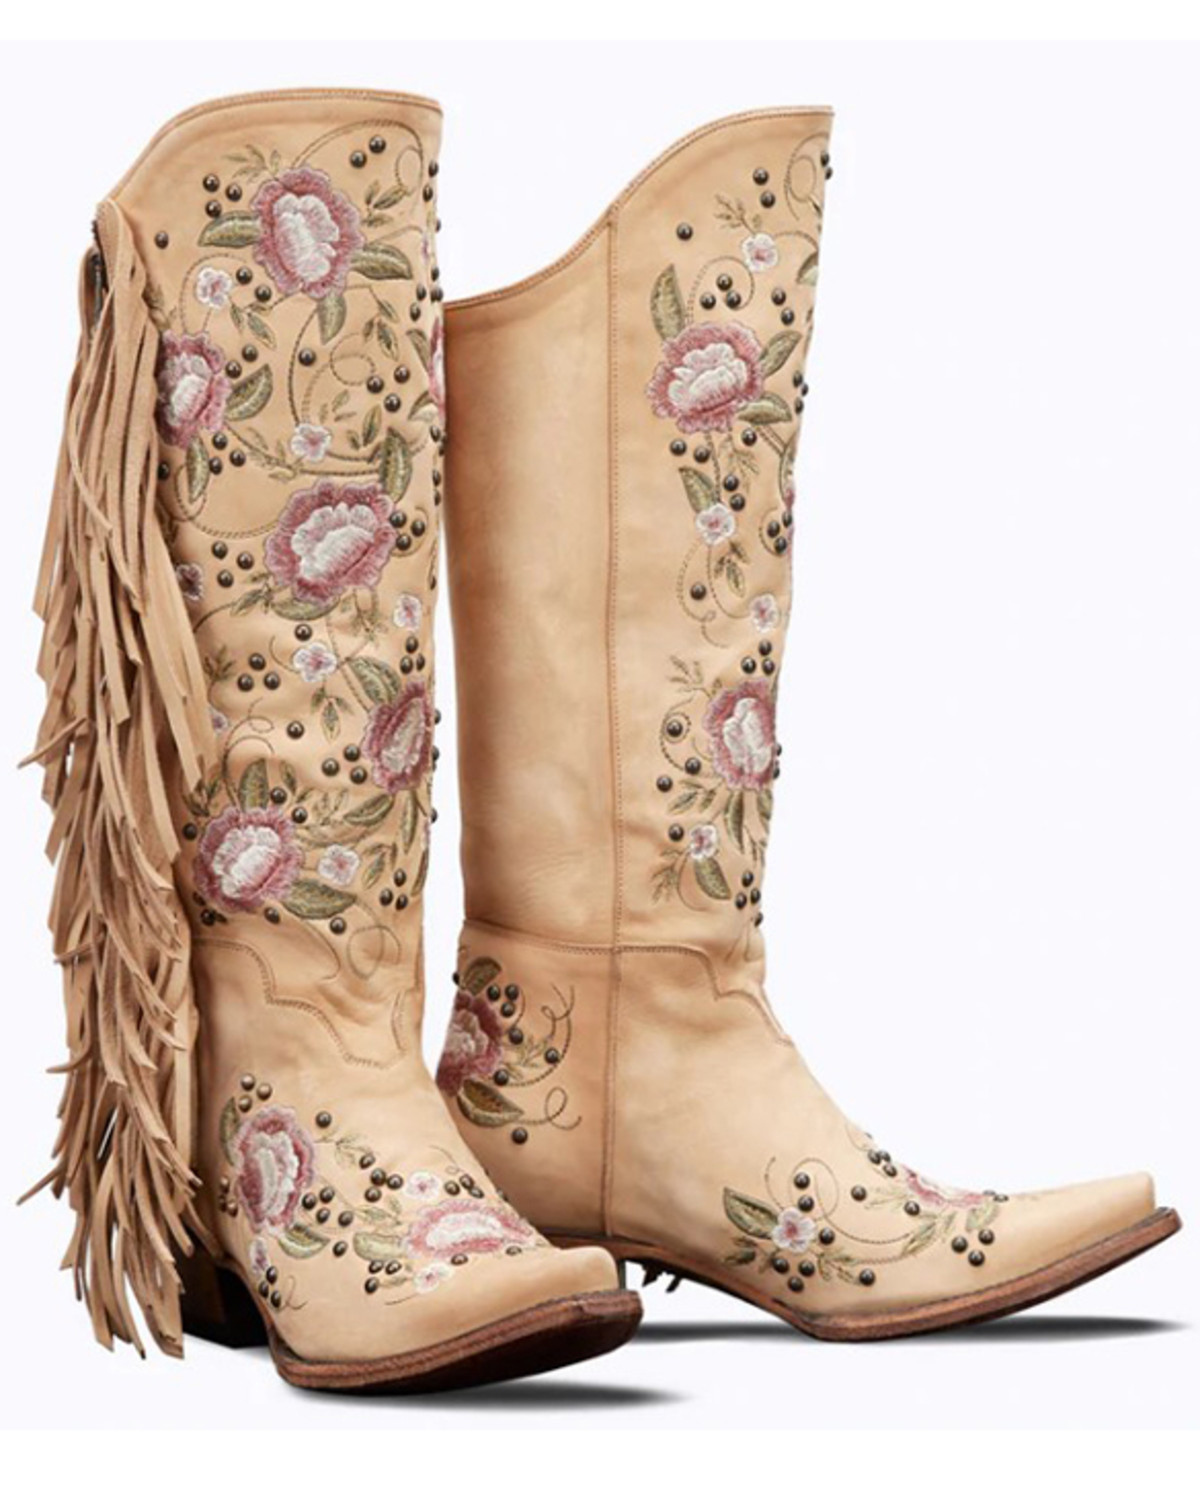 Women's New Floral Embroidery Cowgirl Western Boots Snip Brown Pink Honey 